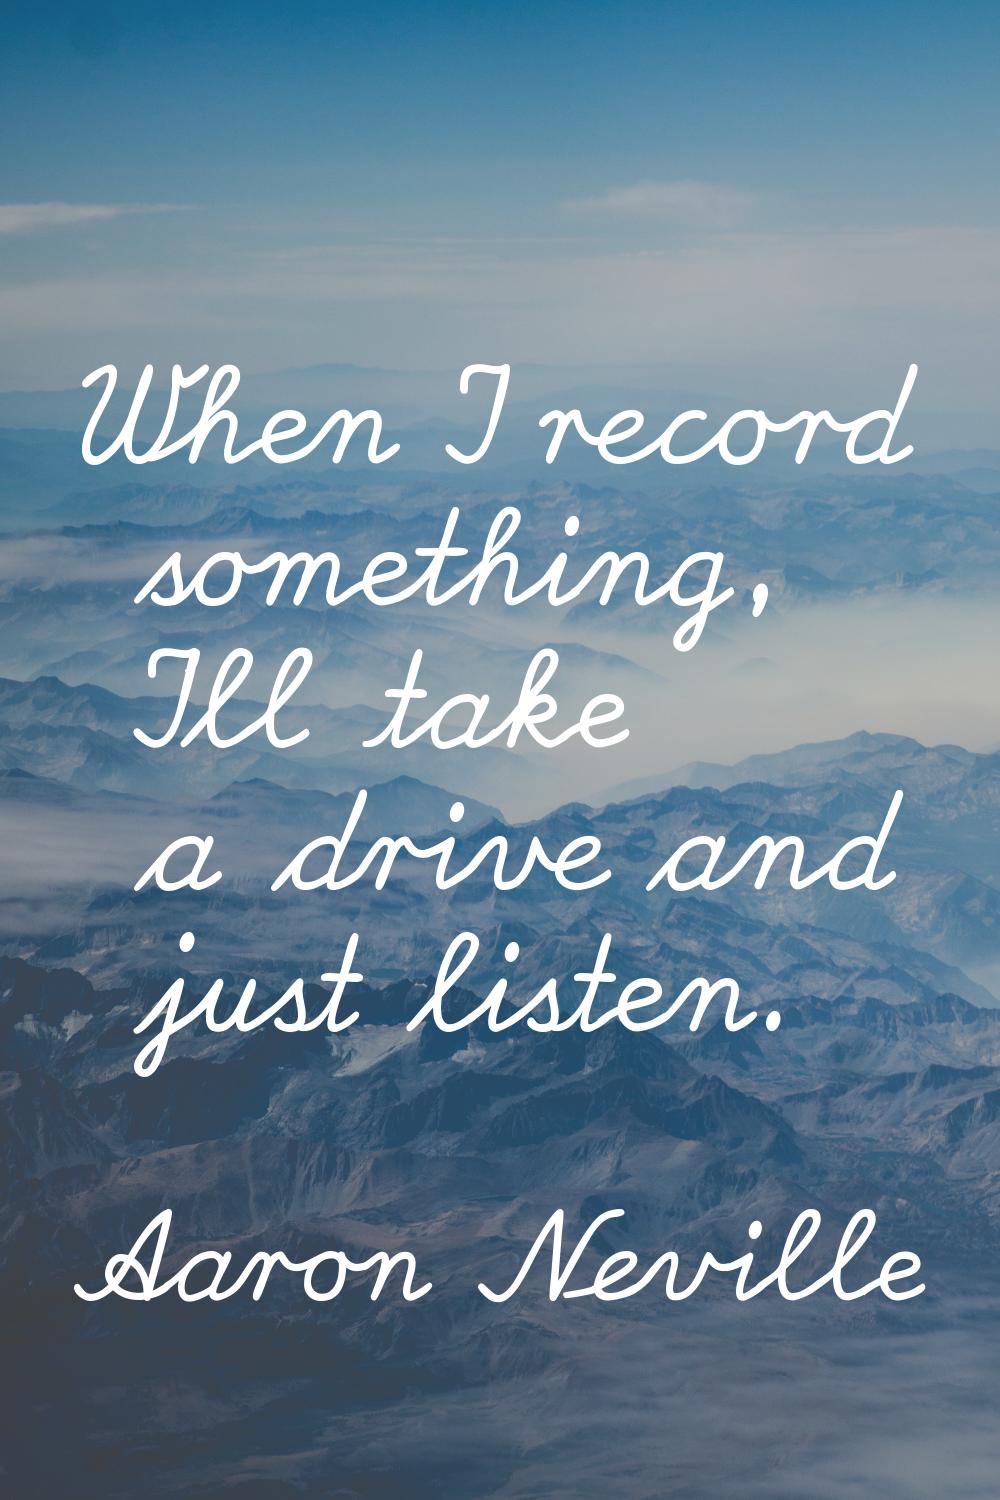 When I record something, I'll take a drive and just listen.